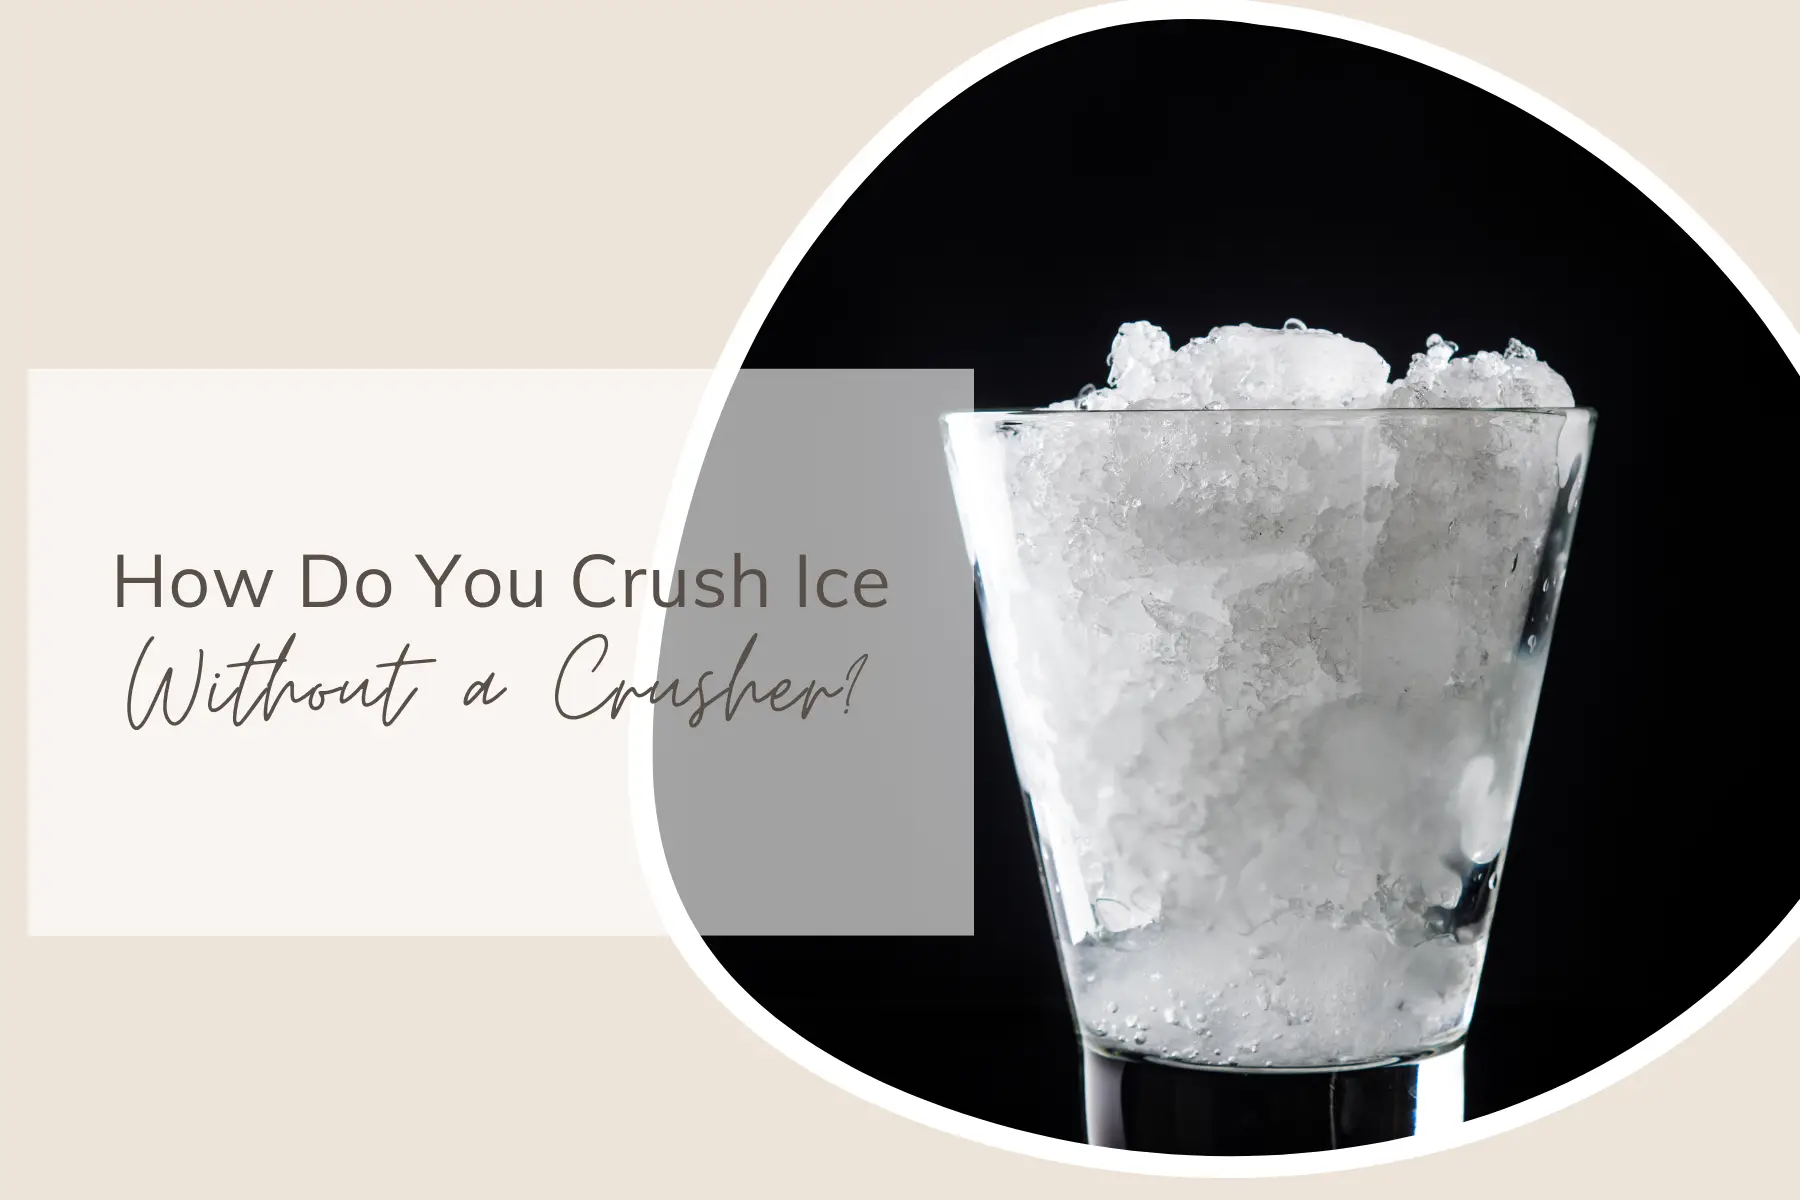 How Do You Crush Ice Without a Crusher?